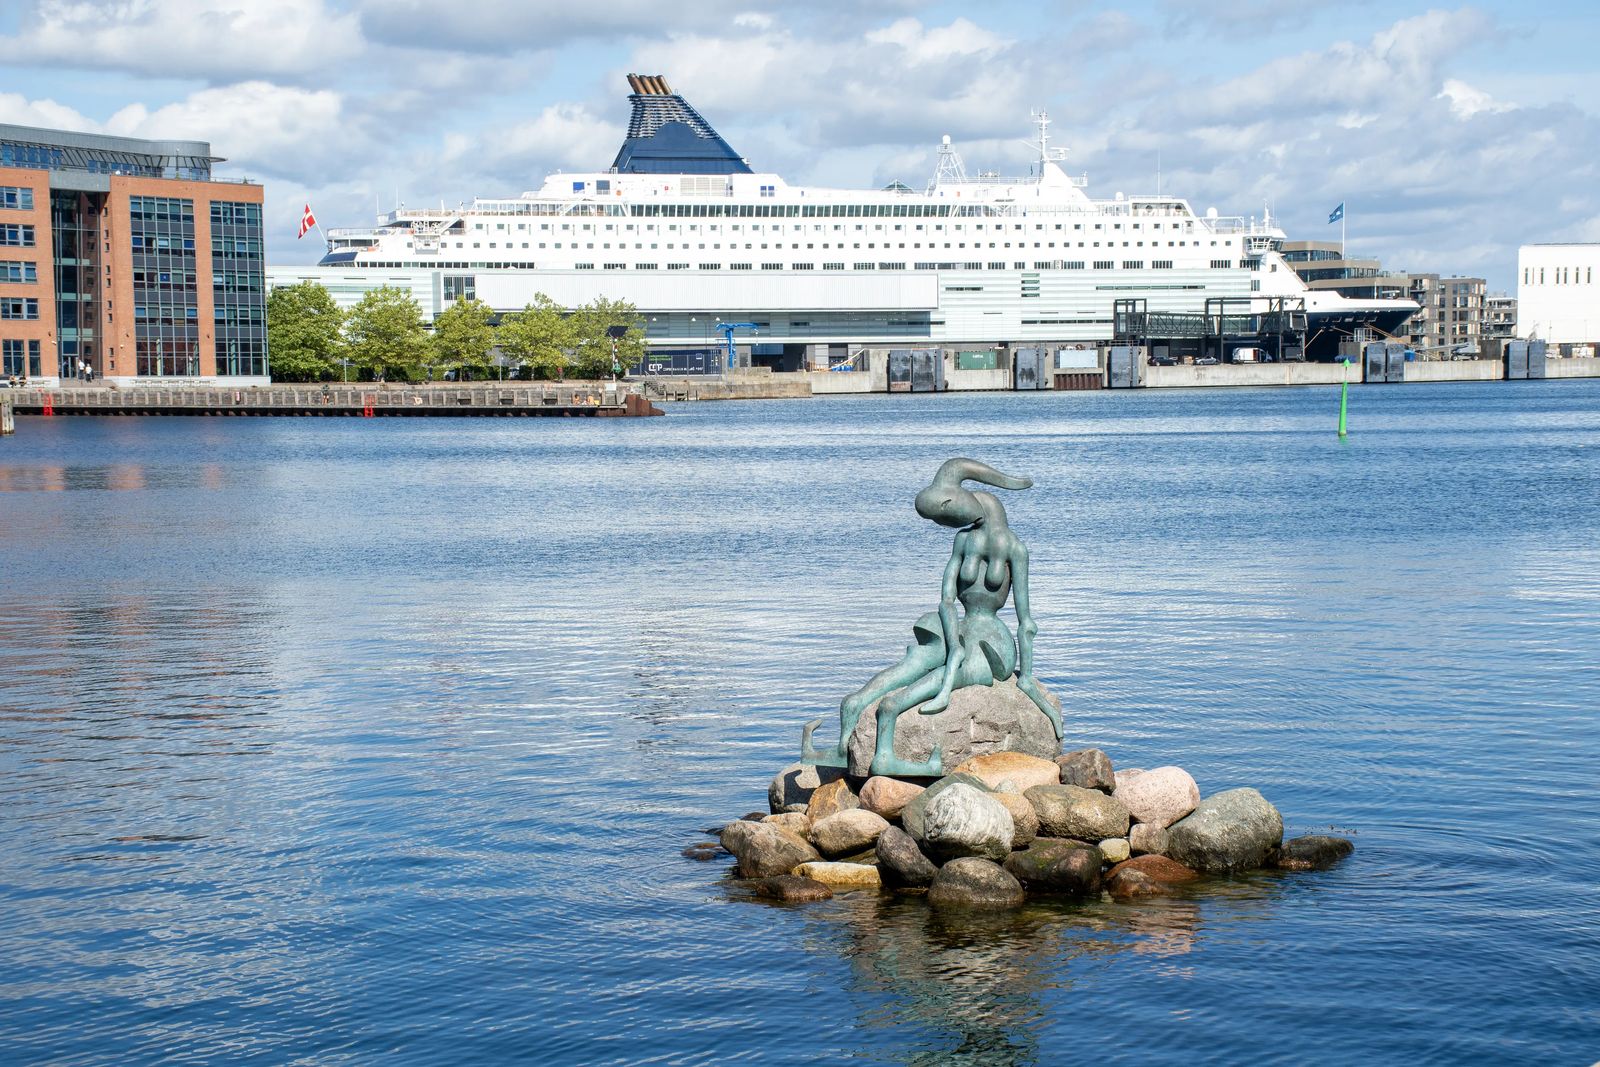 Genetically Modified Little Mermaid - unique things to see in Copenhagen